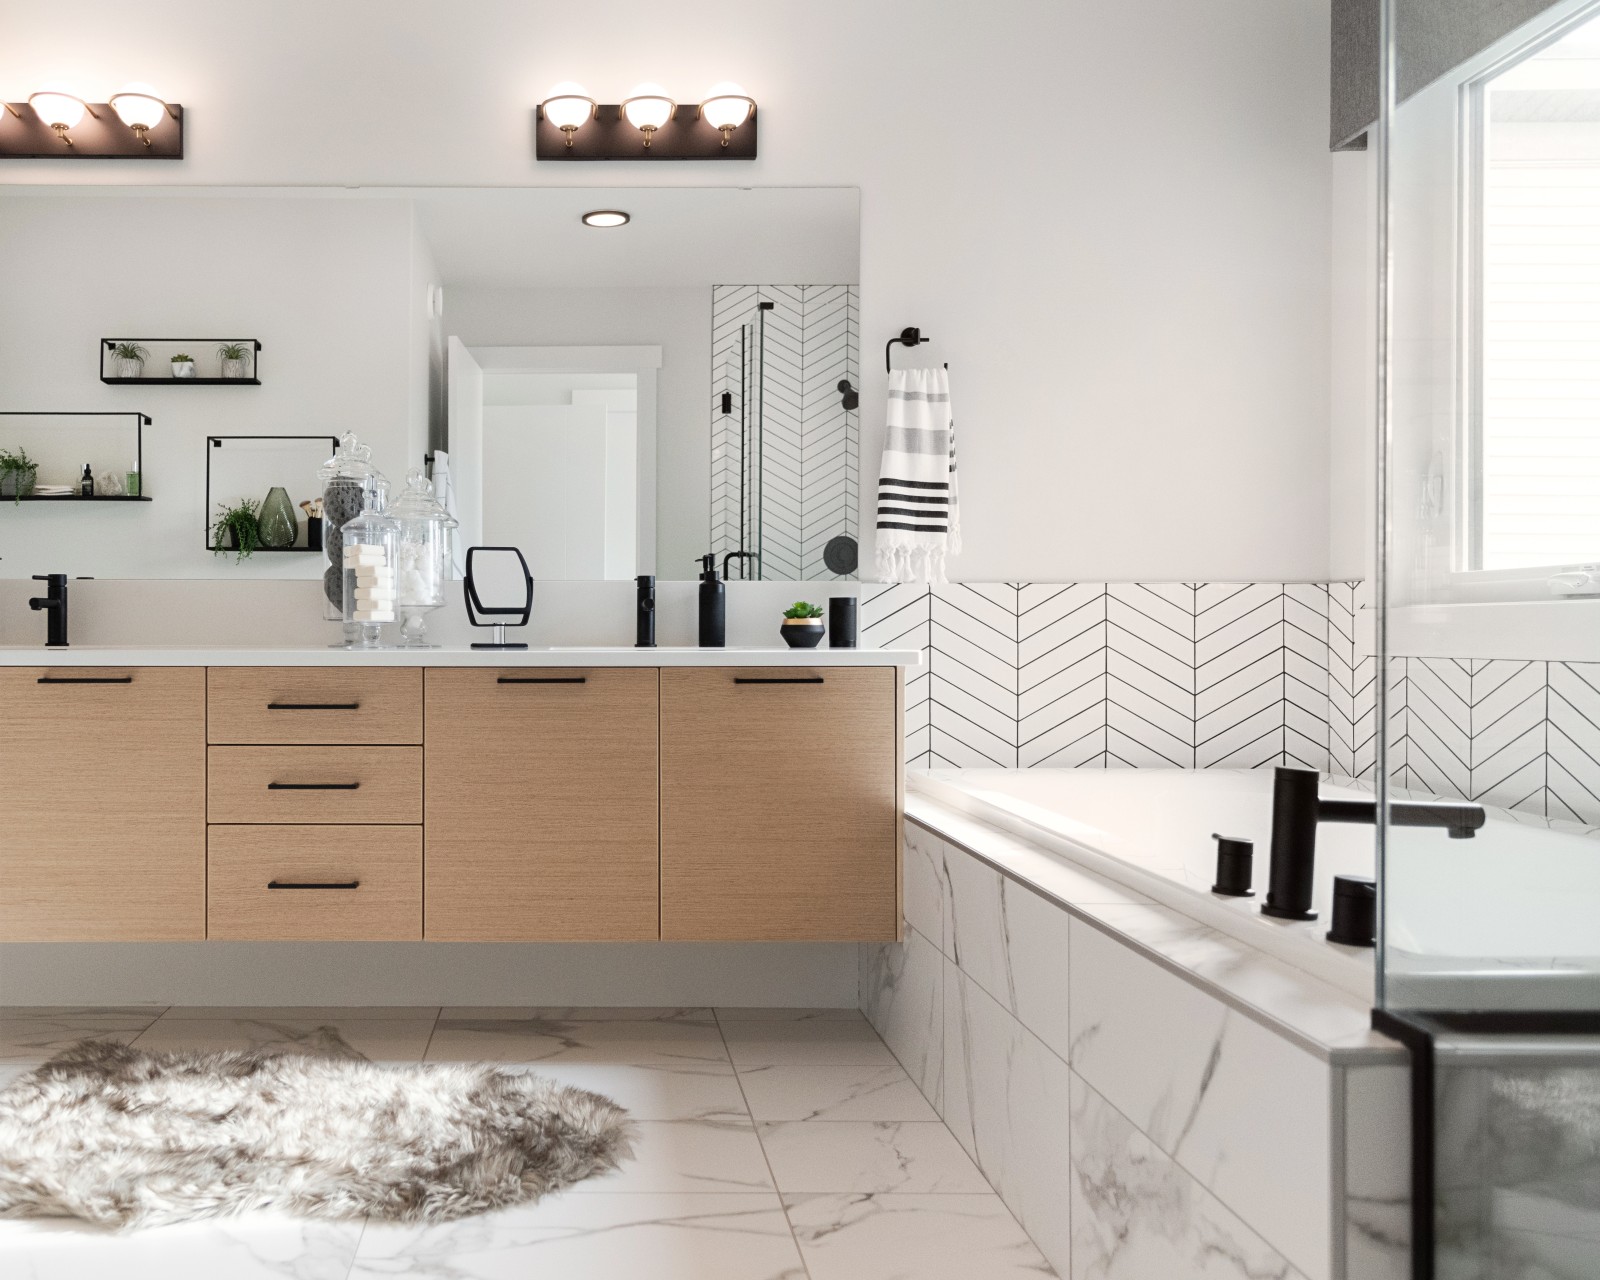 The master ensuite featuring natural wood, floating vanity with white countertops, black fixtures and soaking tub with modern chevron wall tile surround